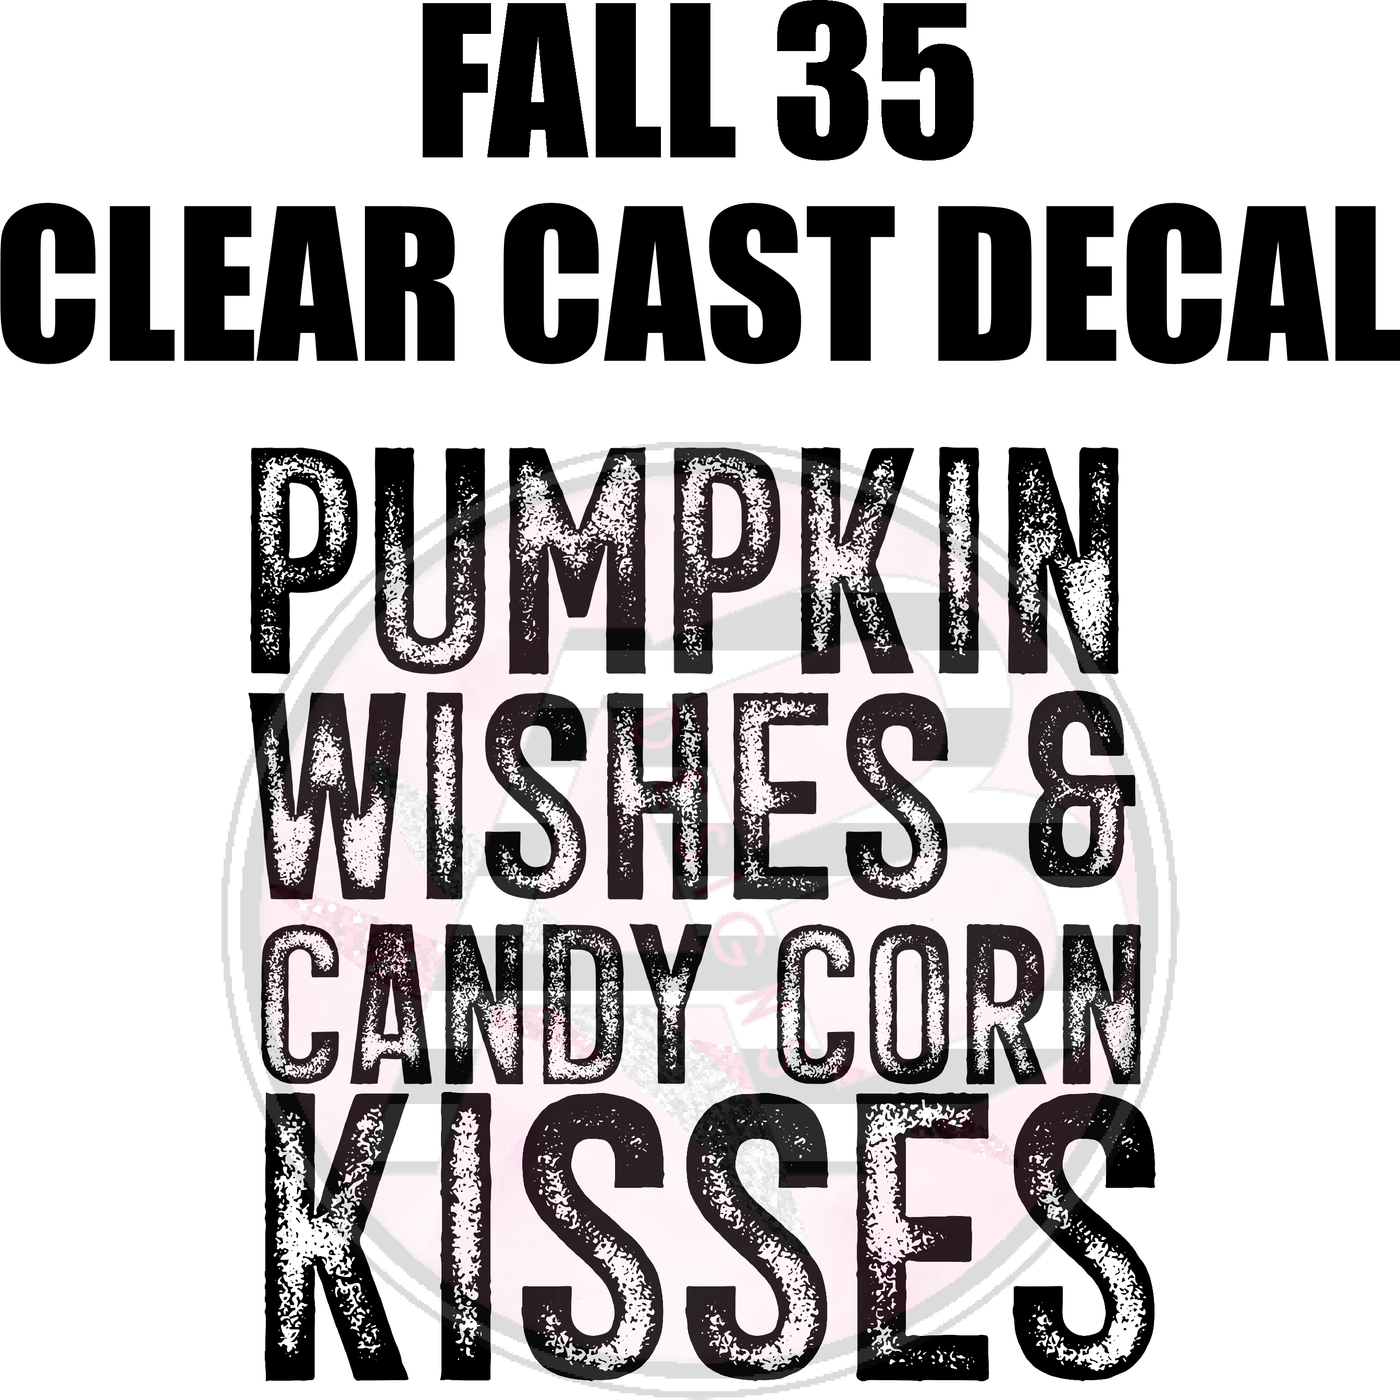 Fall 35 - Clear Cast Decal